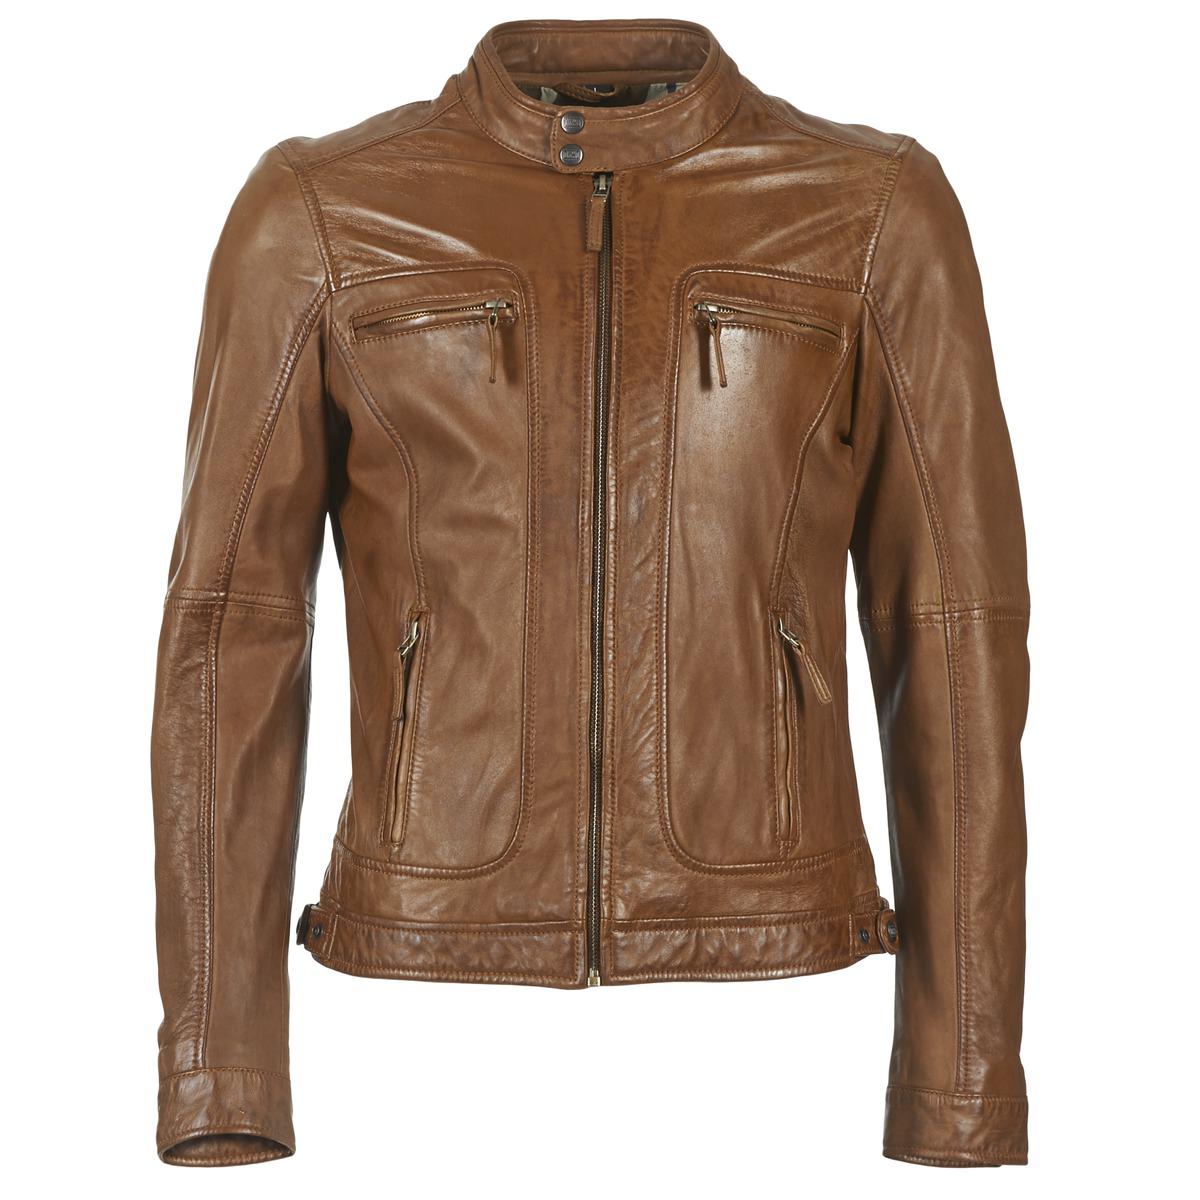 Oakwood 60901 Leather Jacket in Brown for Men - Save 26% - Lyst